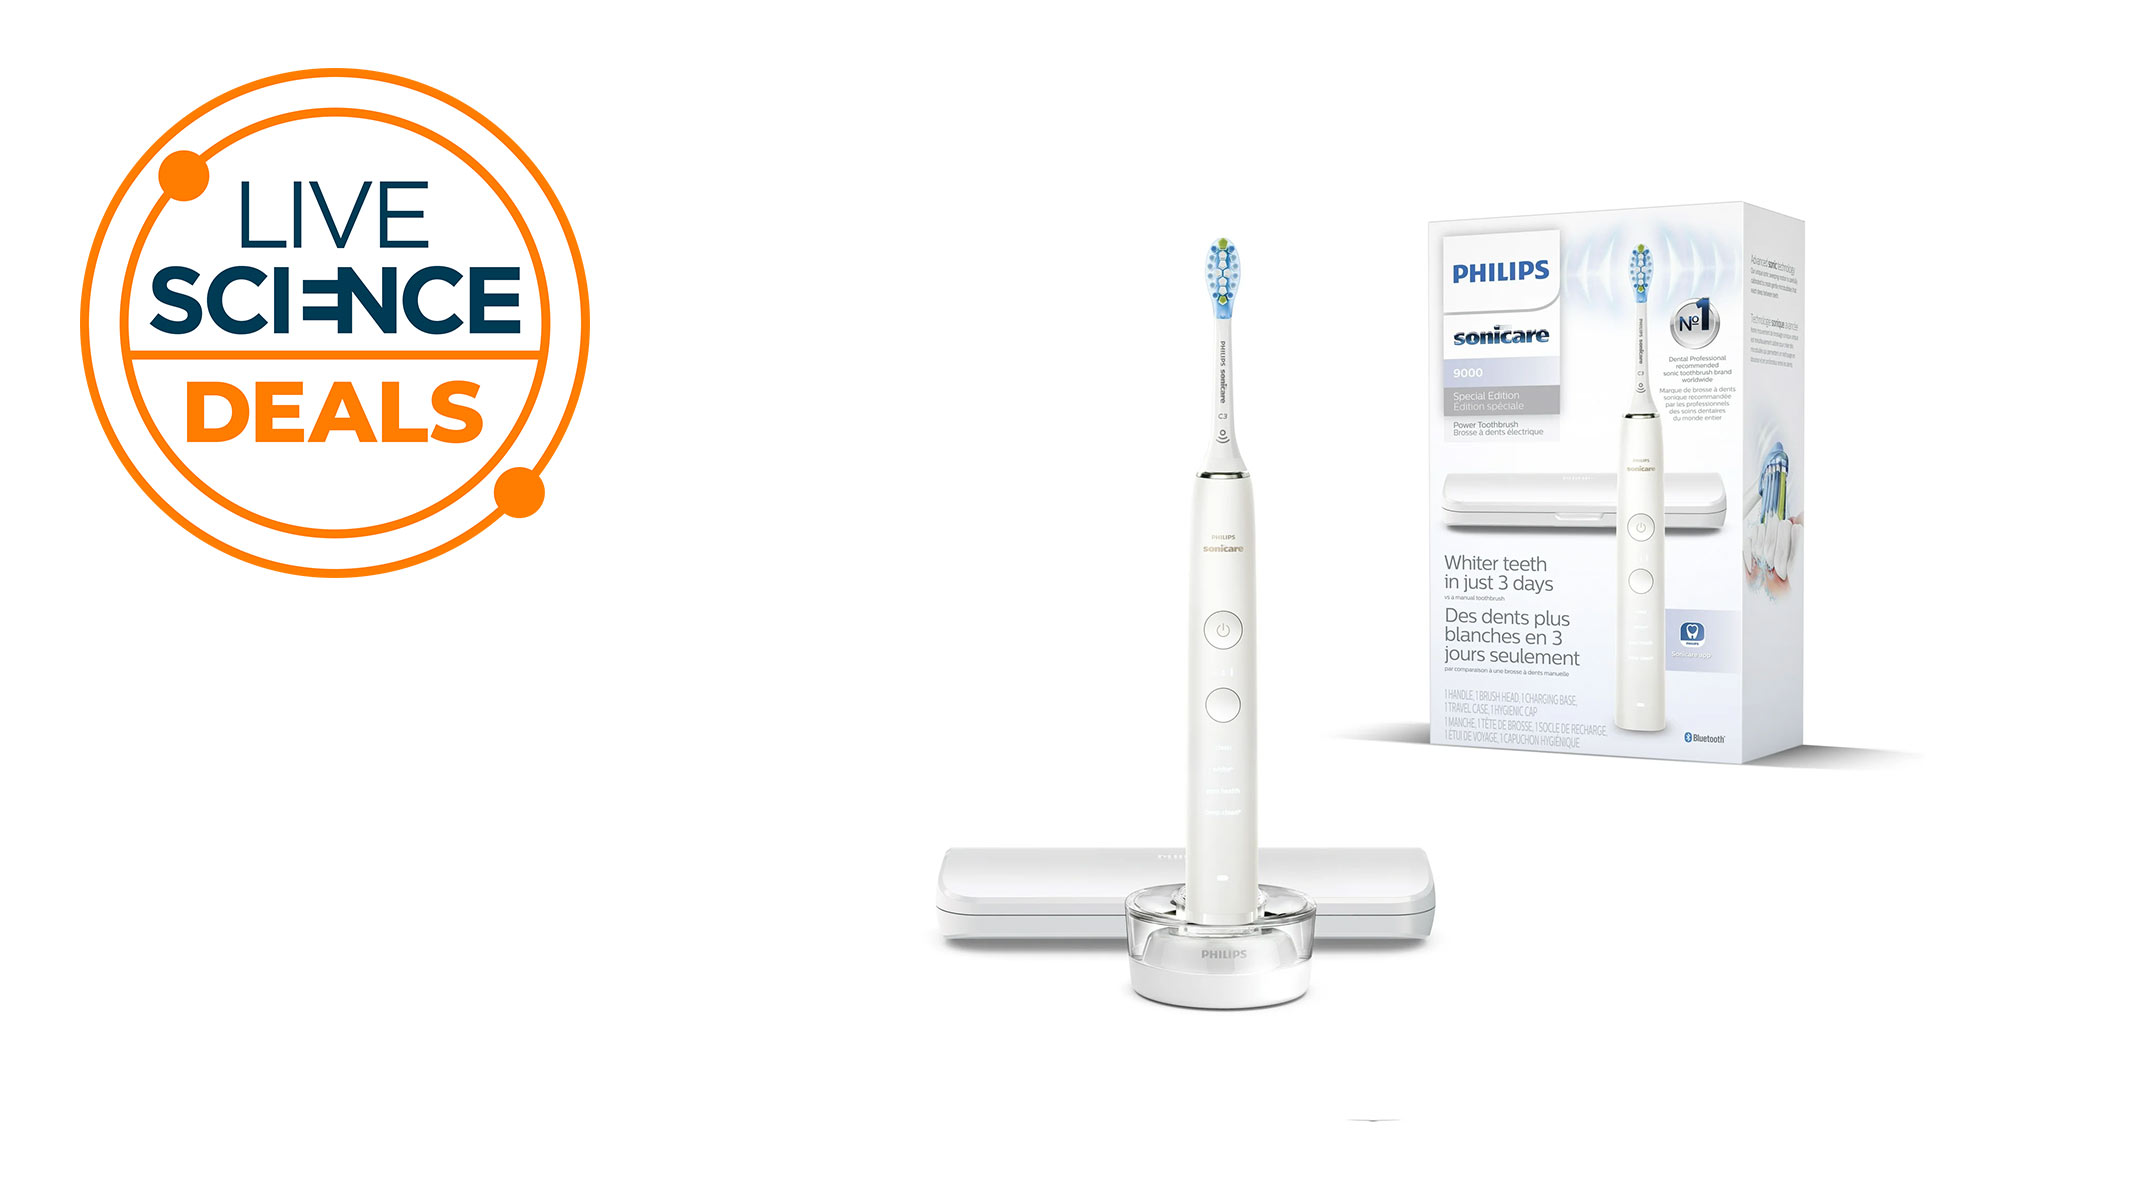  Prime Day electric toothbrush deal: Save 25% at its lowest-ever price 